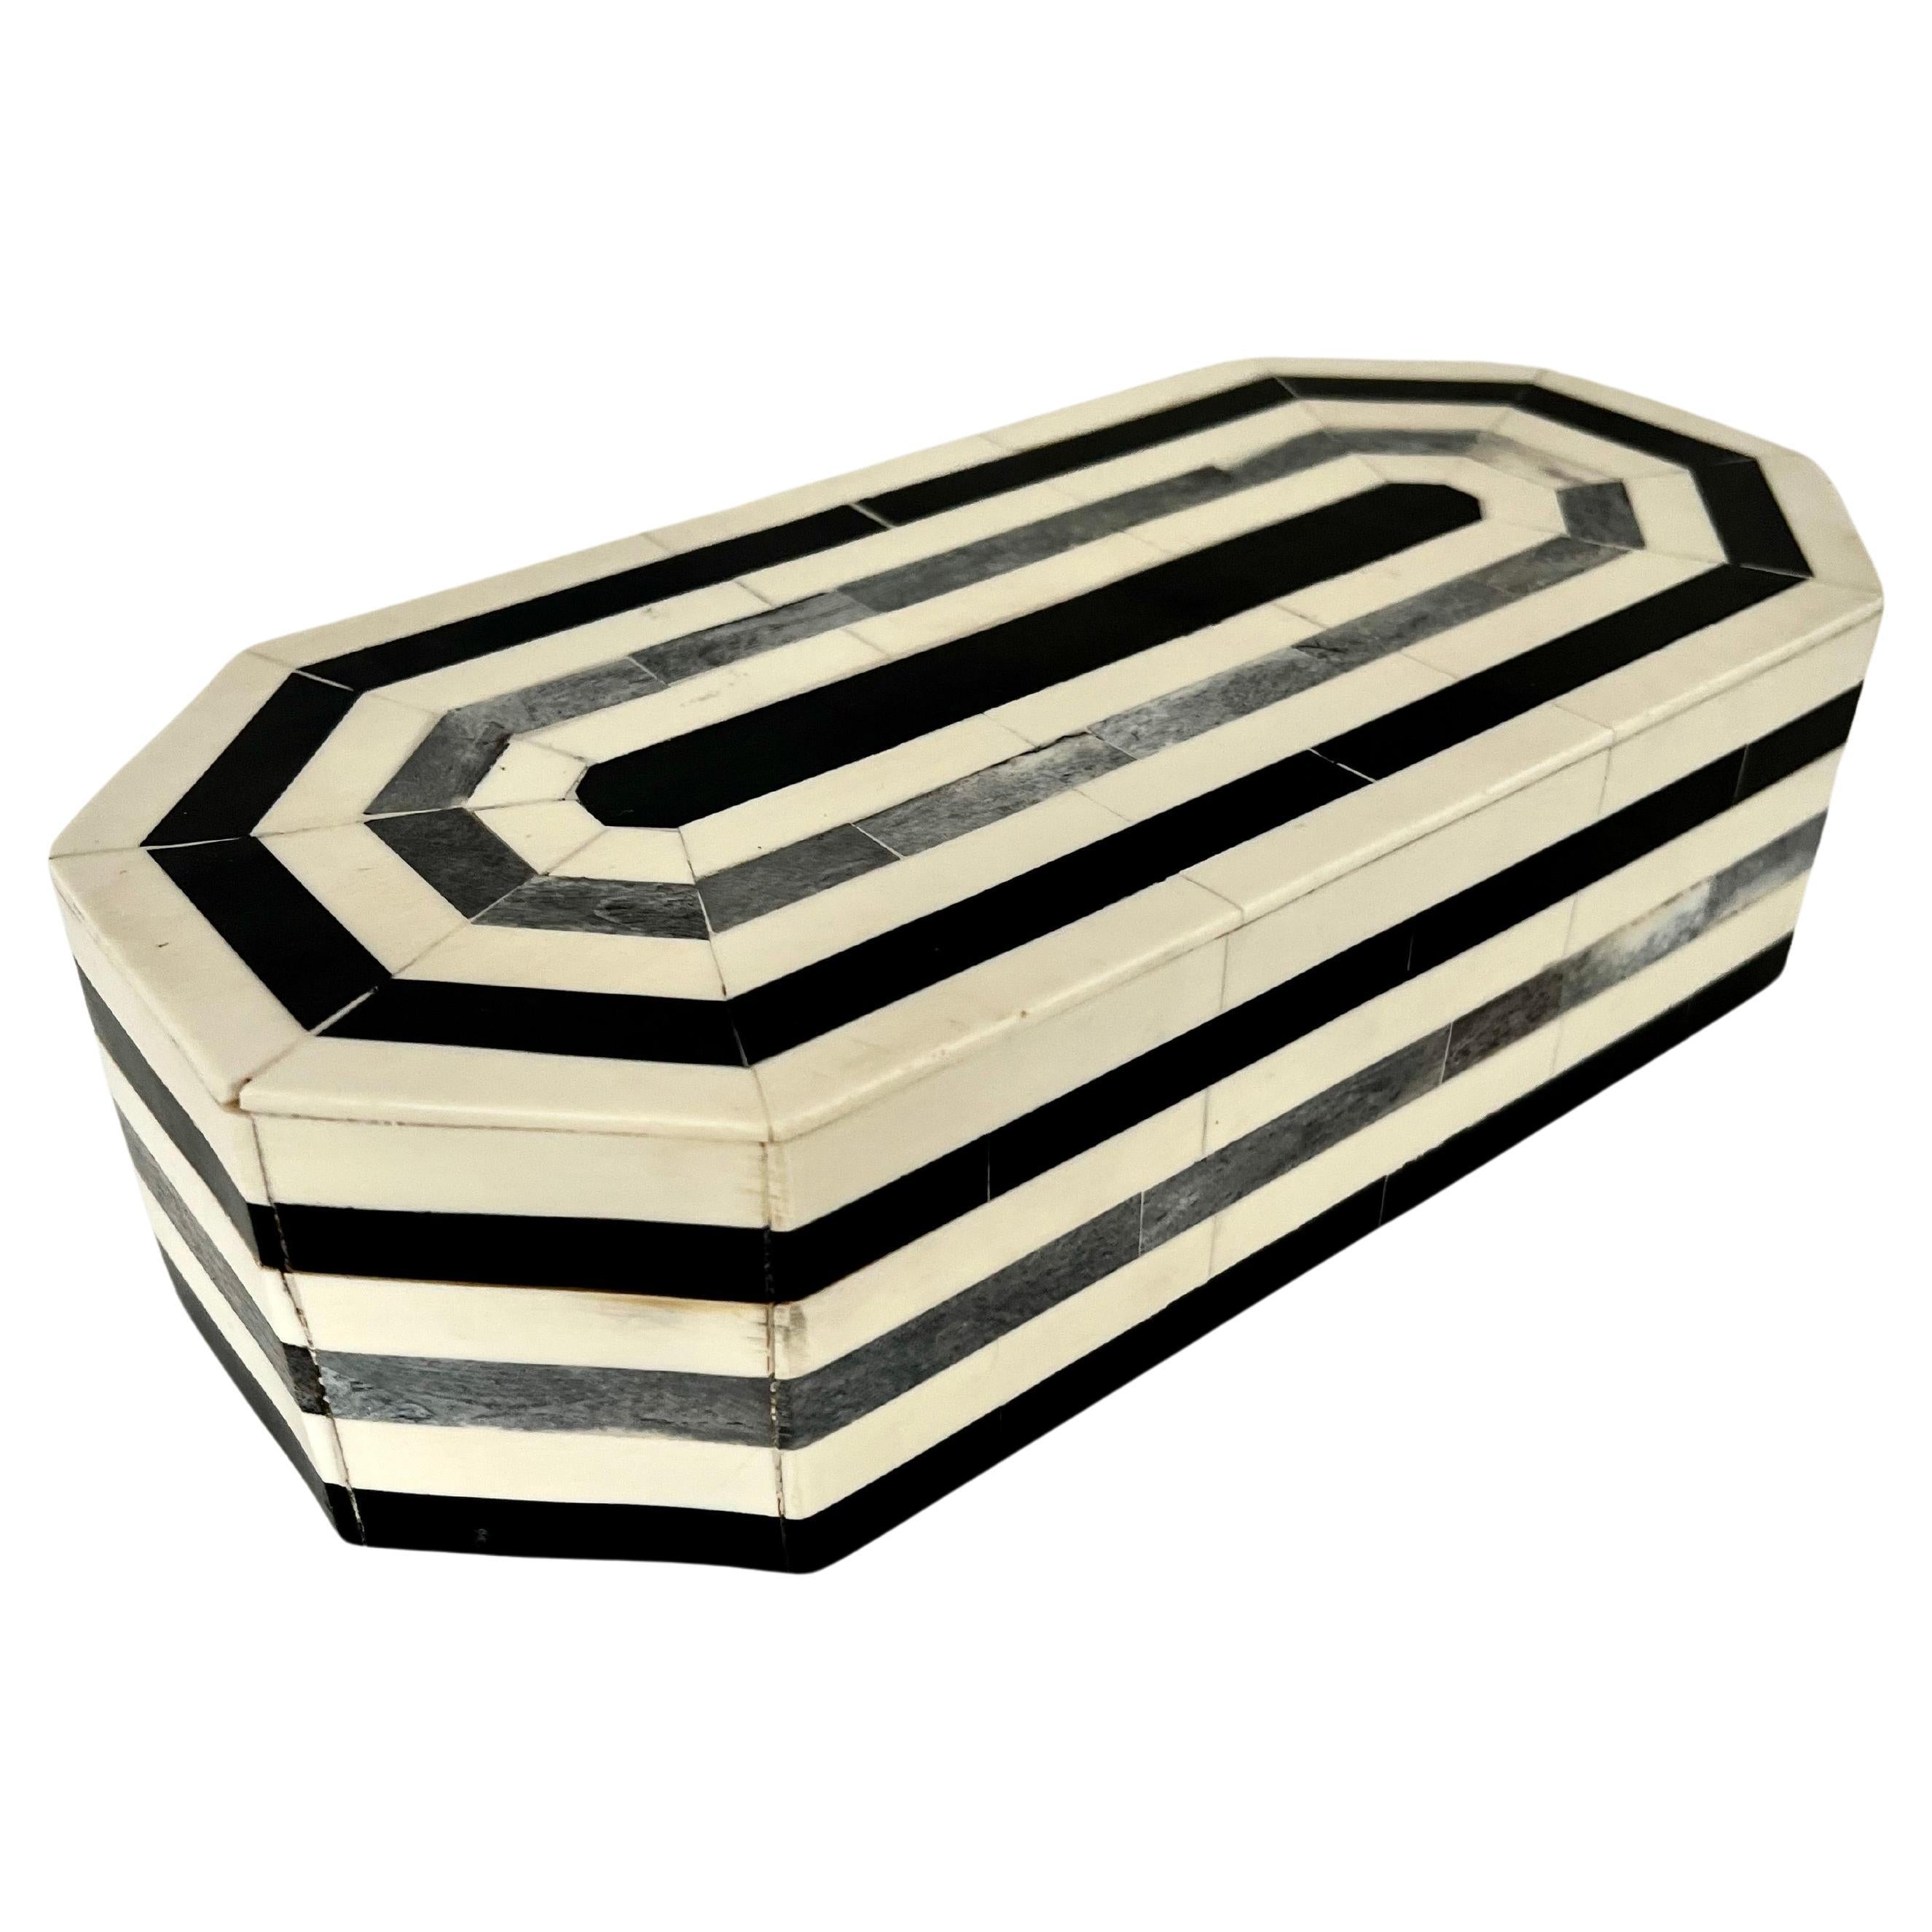 Elongated Octagonal Lidded Tessellated Bone Box in the Style of Enrique Garcel